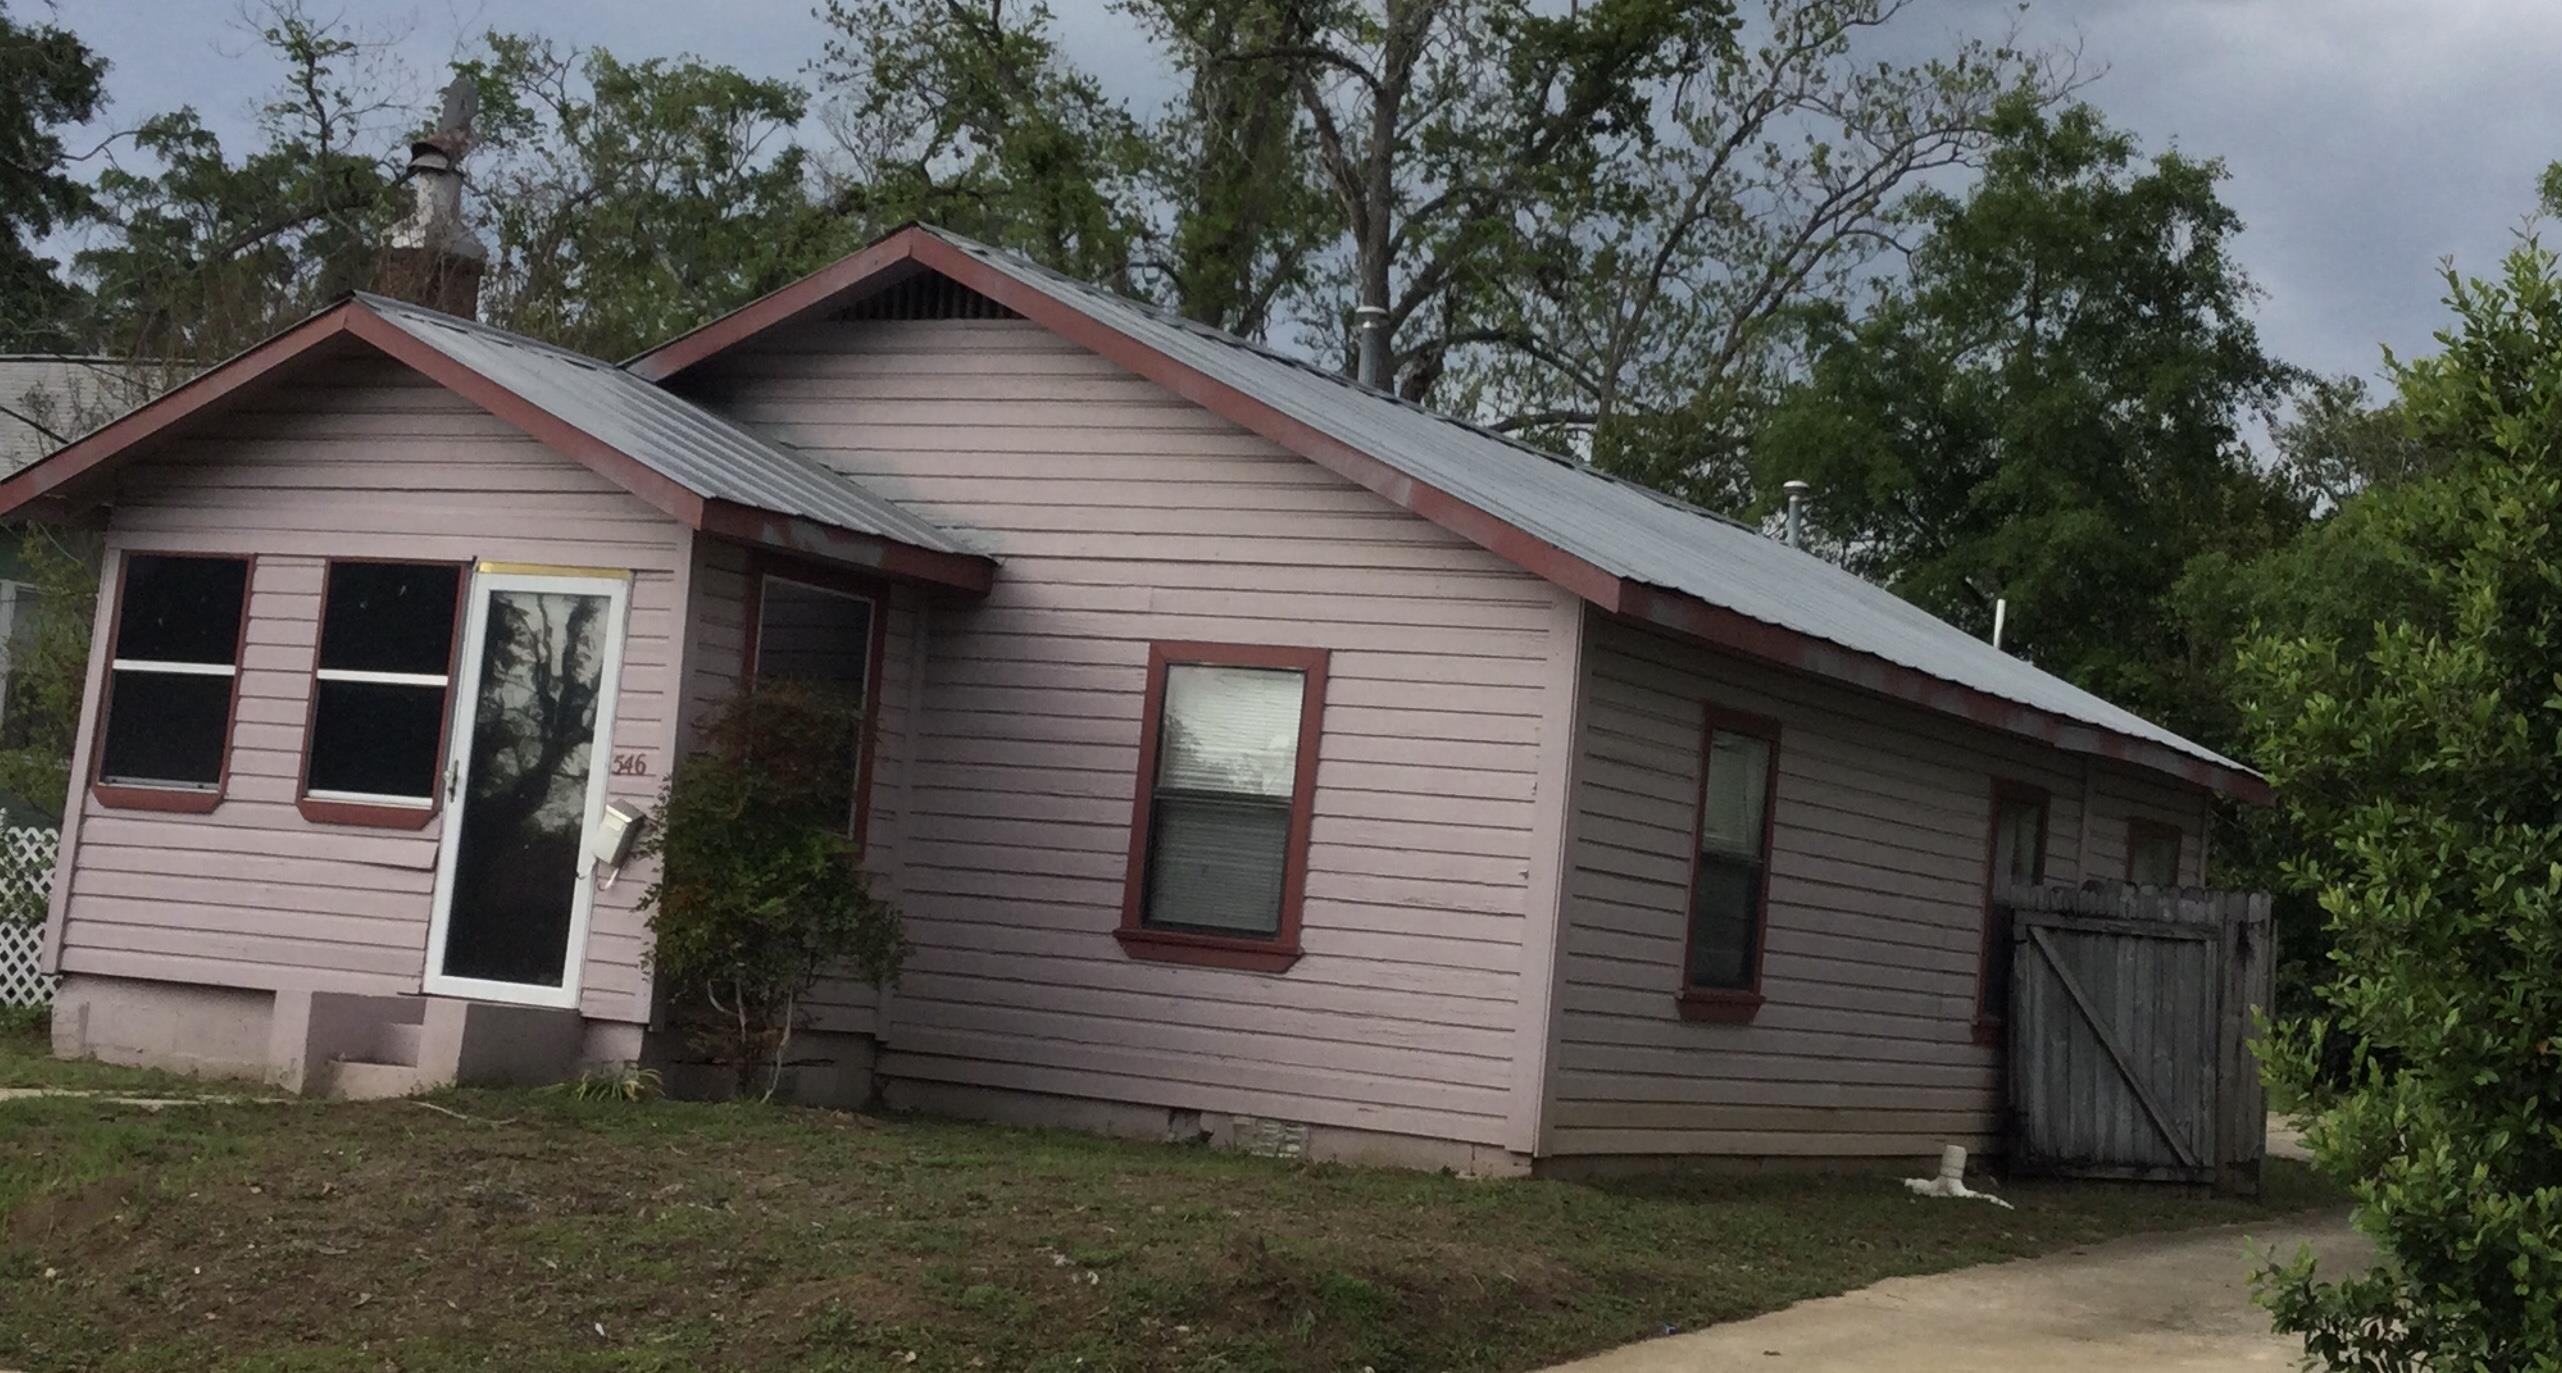 Older home needs TLC. Needs roof and windows. With a solid, ancestral feel, this gem would be perfect to raise your family in. There is a longterm tenant, who wishes to stay. If not, lease ends June 1, 2023